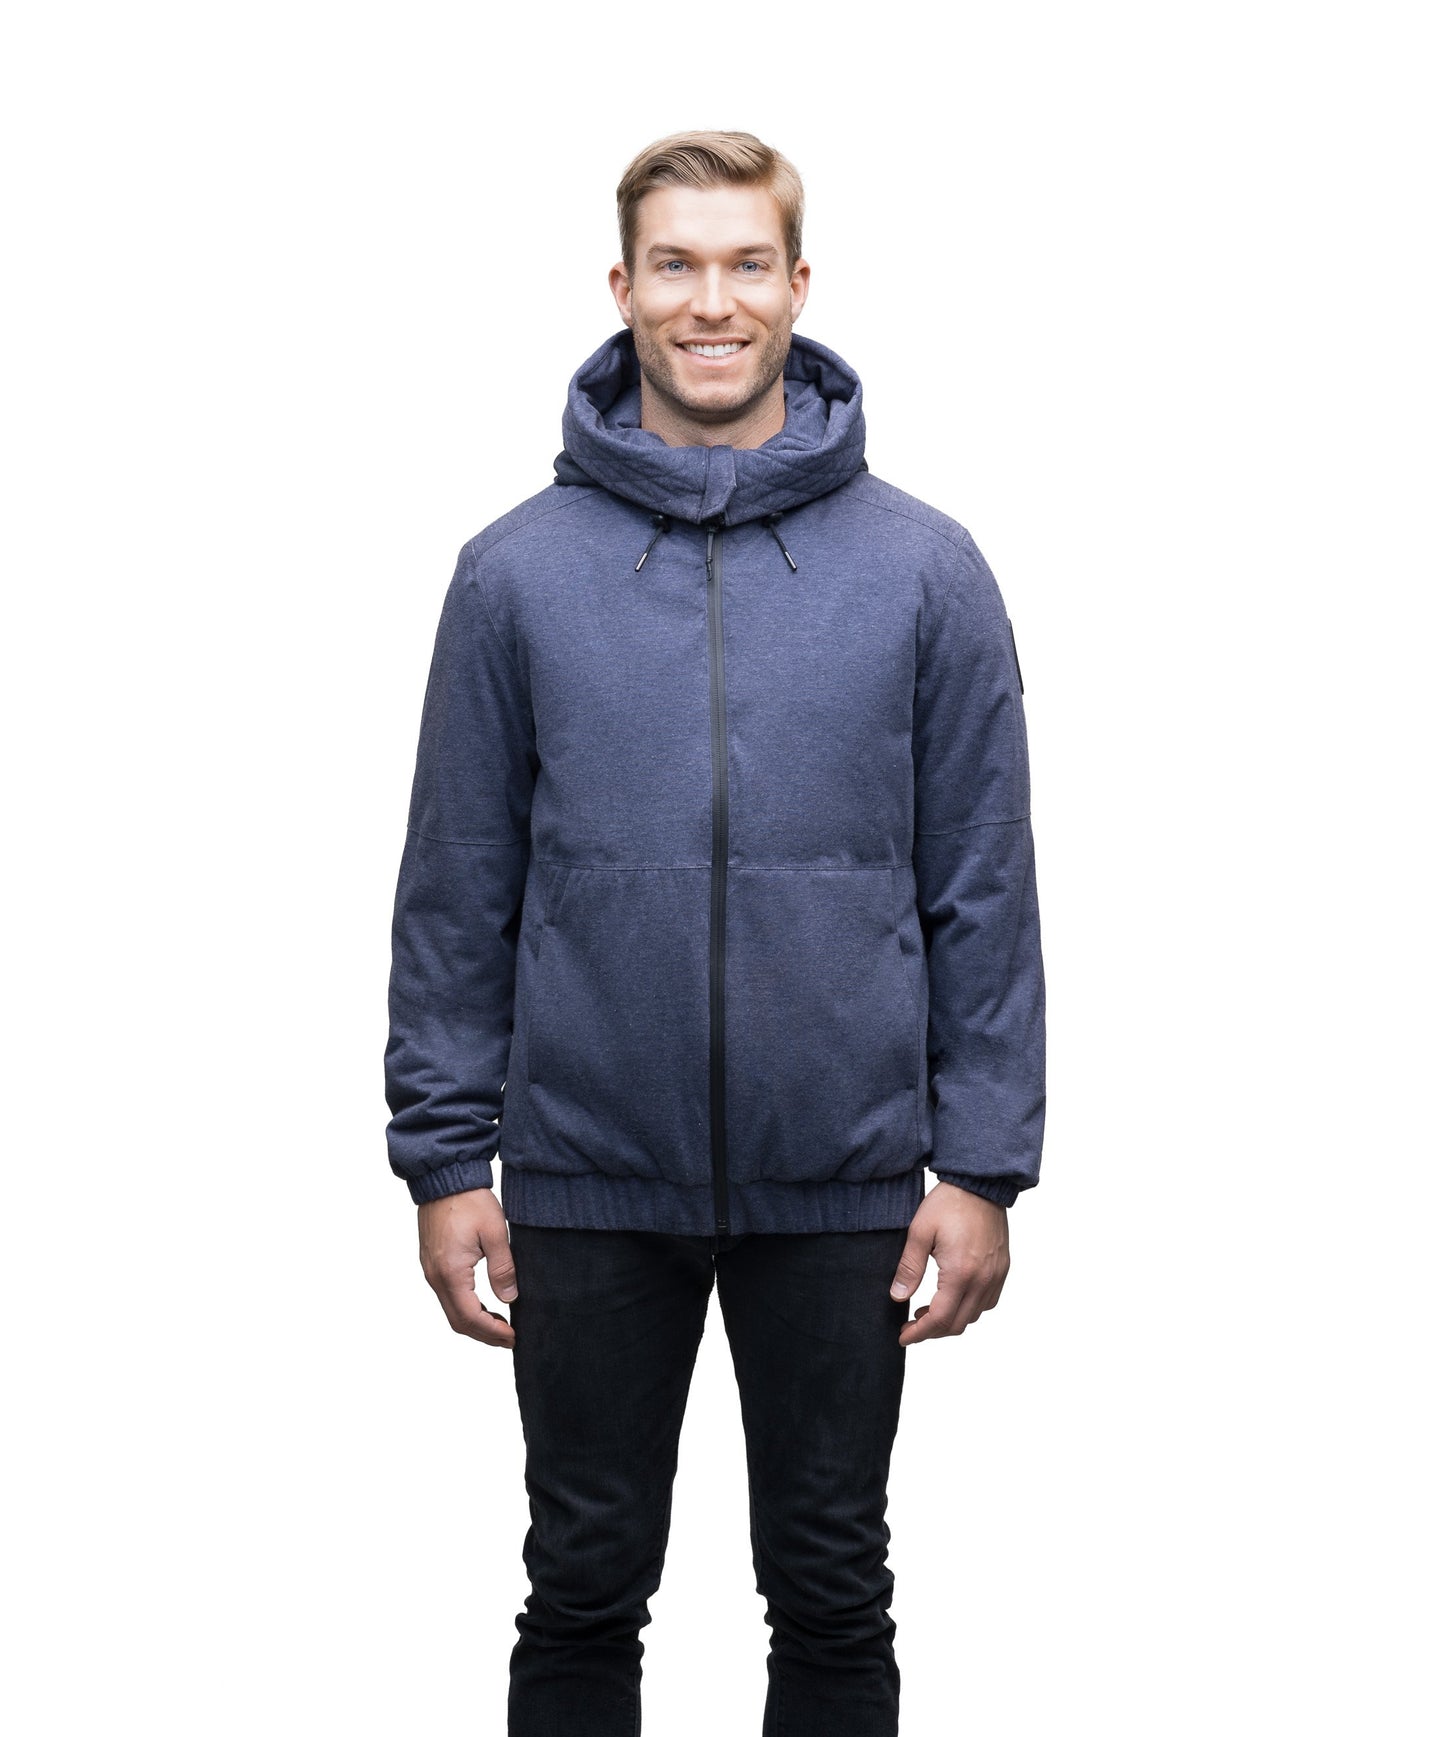 Men's lightweight down filled jersey hoodie that's windproof, waterproof and breathable in Navy